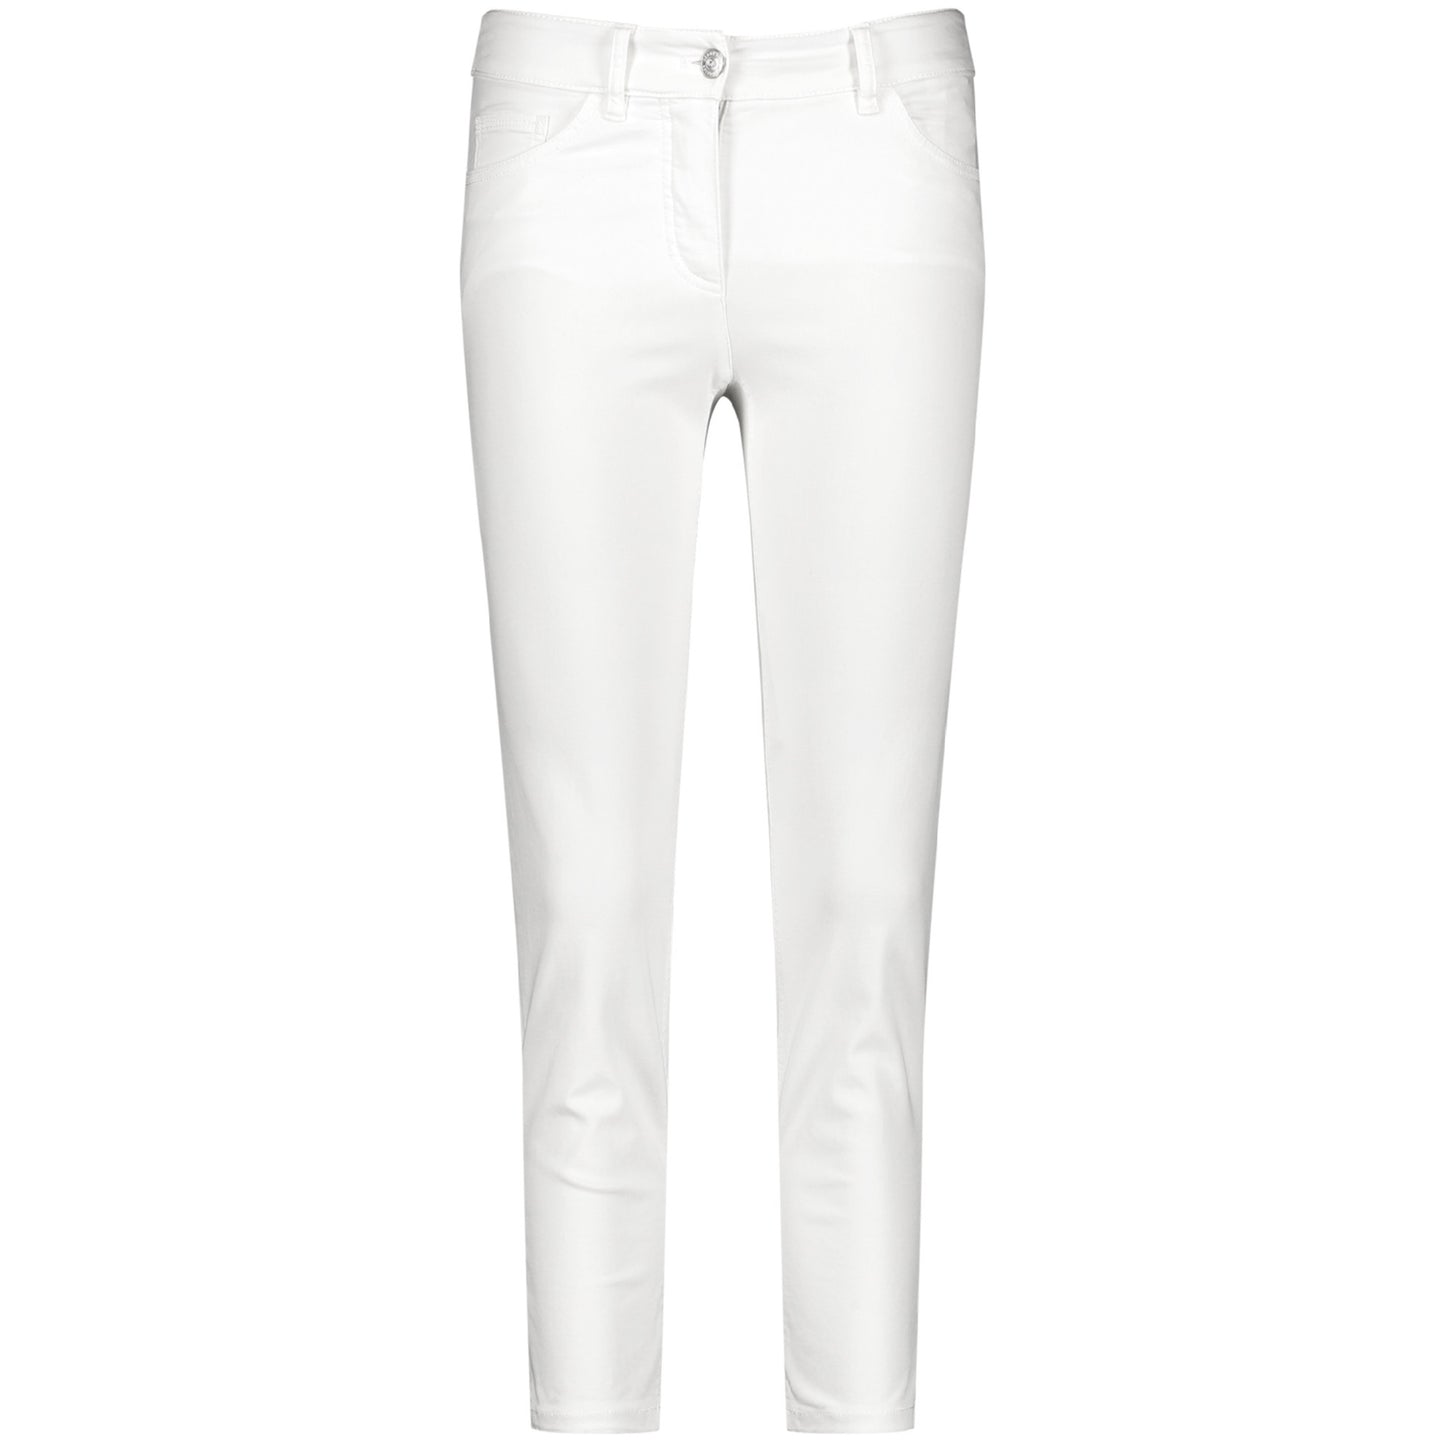 Gerry Weber 92335 67965 99600 Know White Jeans